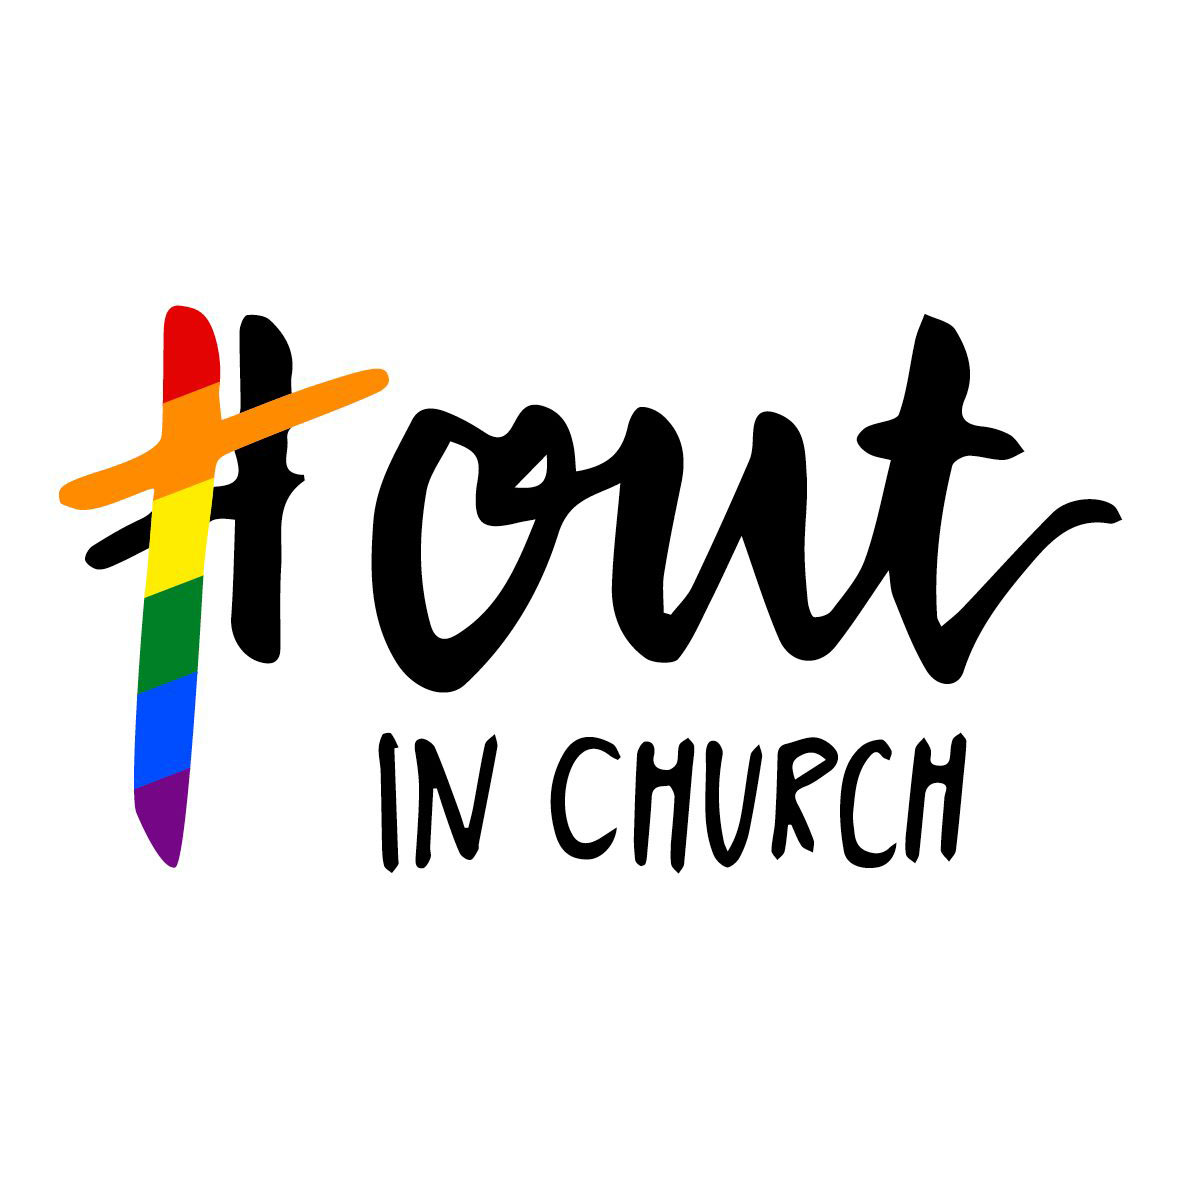 Queer and religios – an interfaith panel discussion